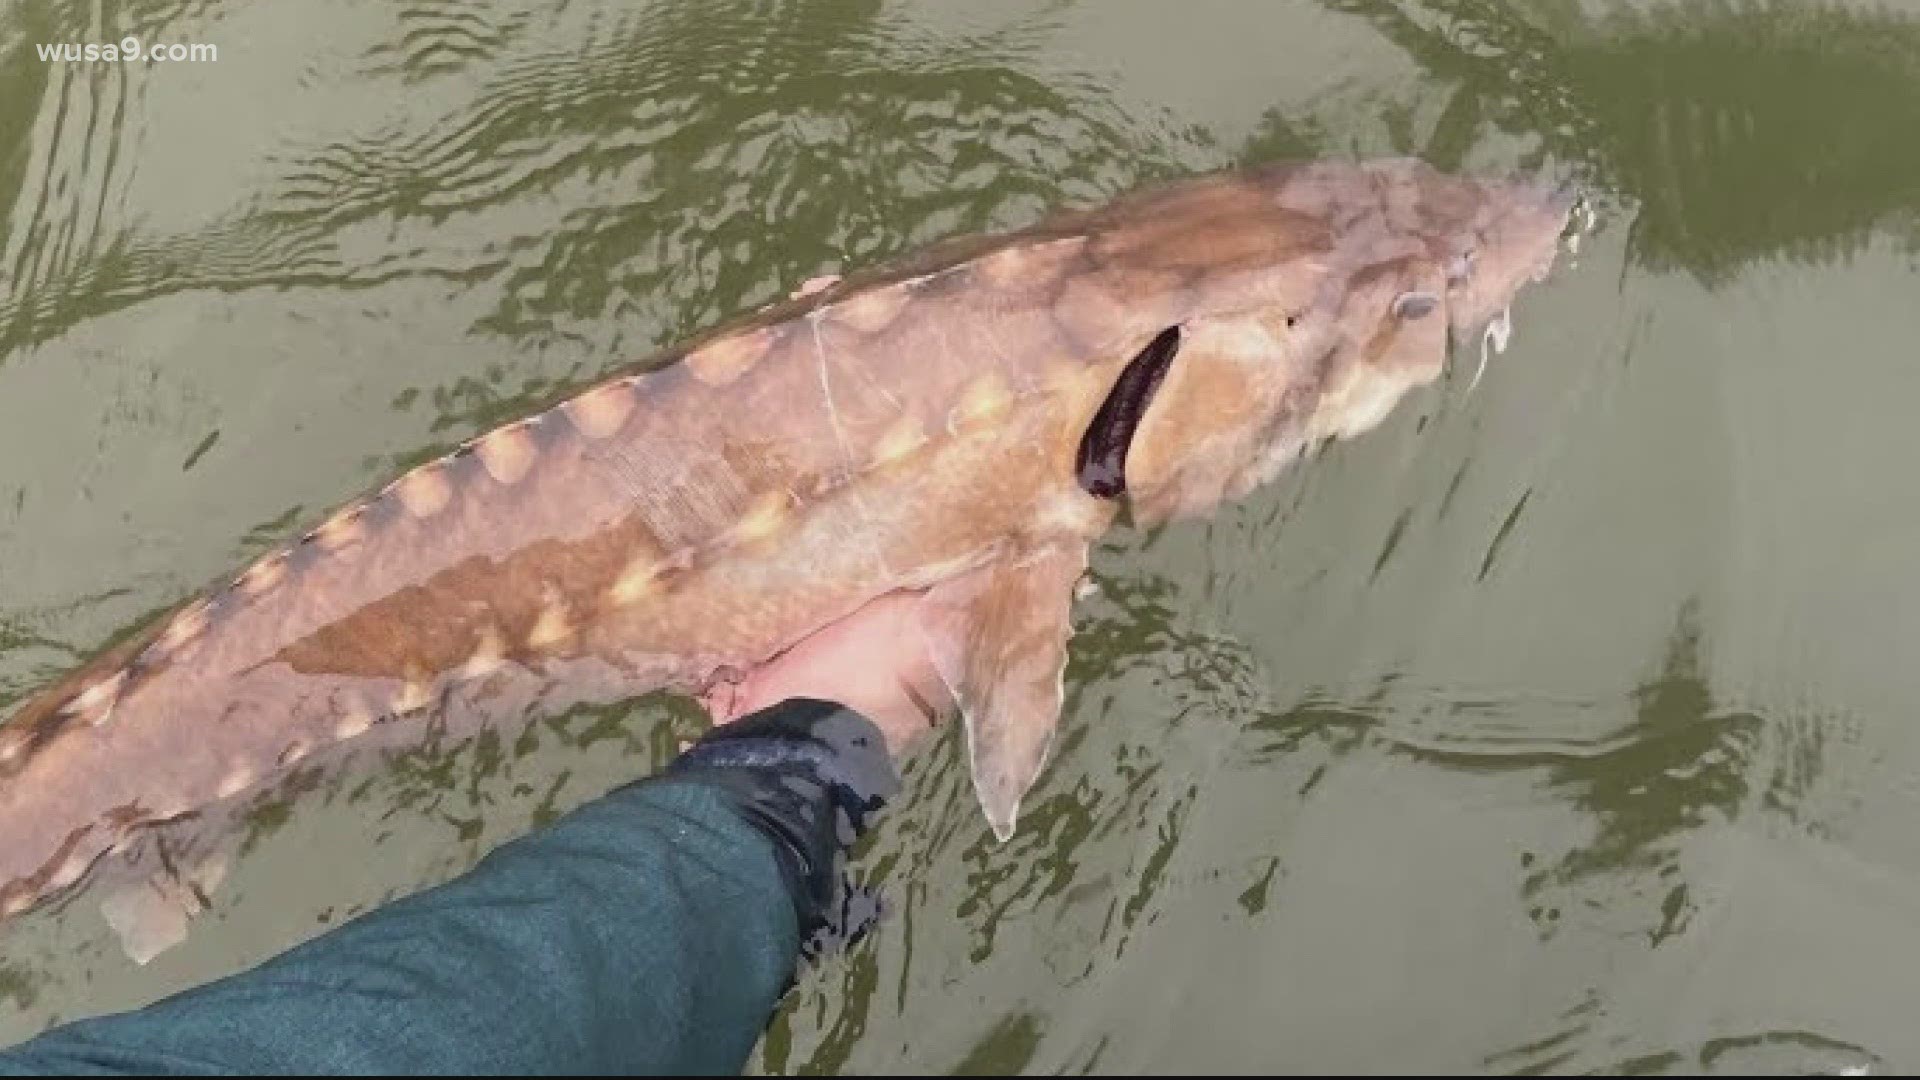 The endangered species reminiscent of the dinosaur era has not been seen in the river for 14 years. “It was like catching a Unicorn," stunned fisherman says